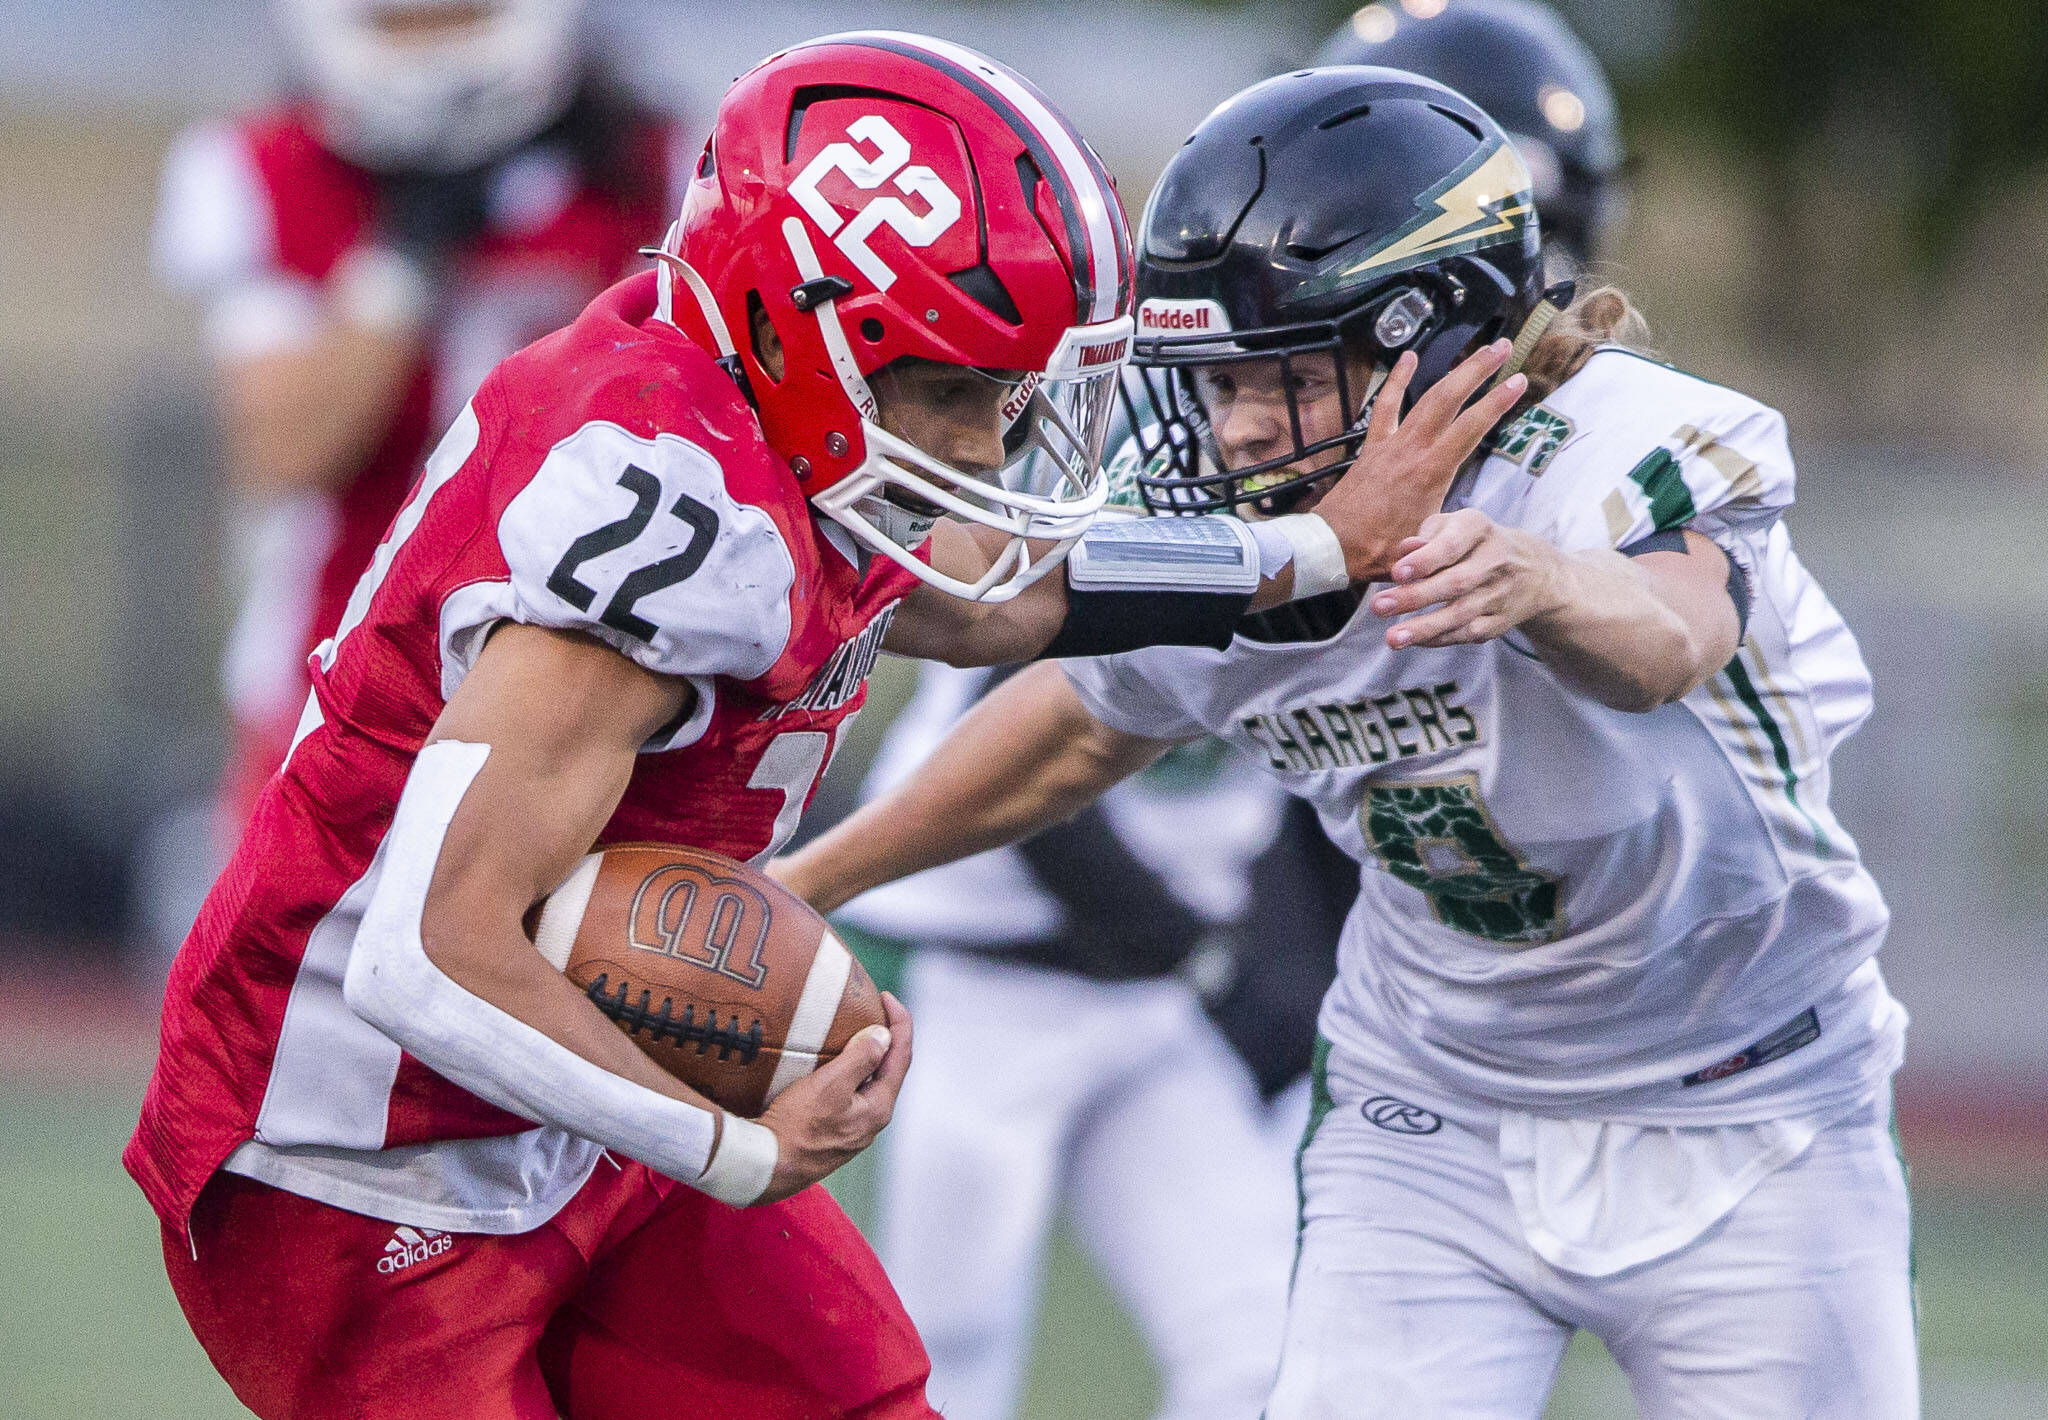 Marysville Pilchuck’s Joseph Davis sticks out his arm to block a tackle by Marysville Getchell’s Sean Ewald during a game on Sept. 16, 2022, in Marysville. (Olivia Vanni / The Herald)